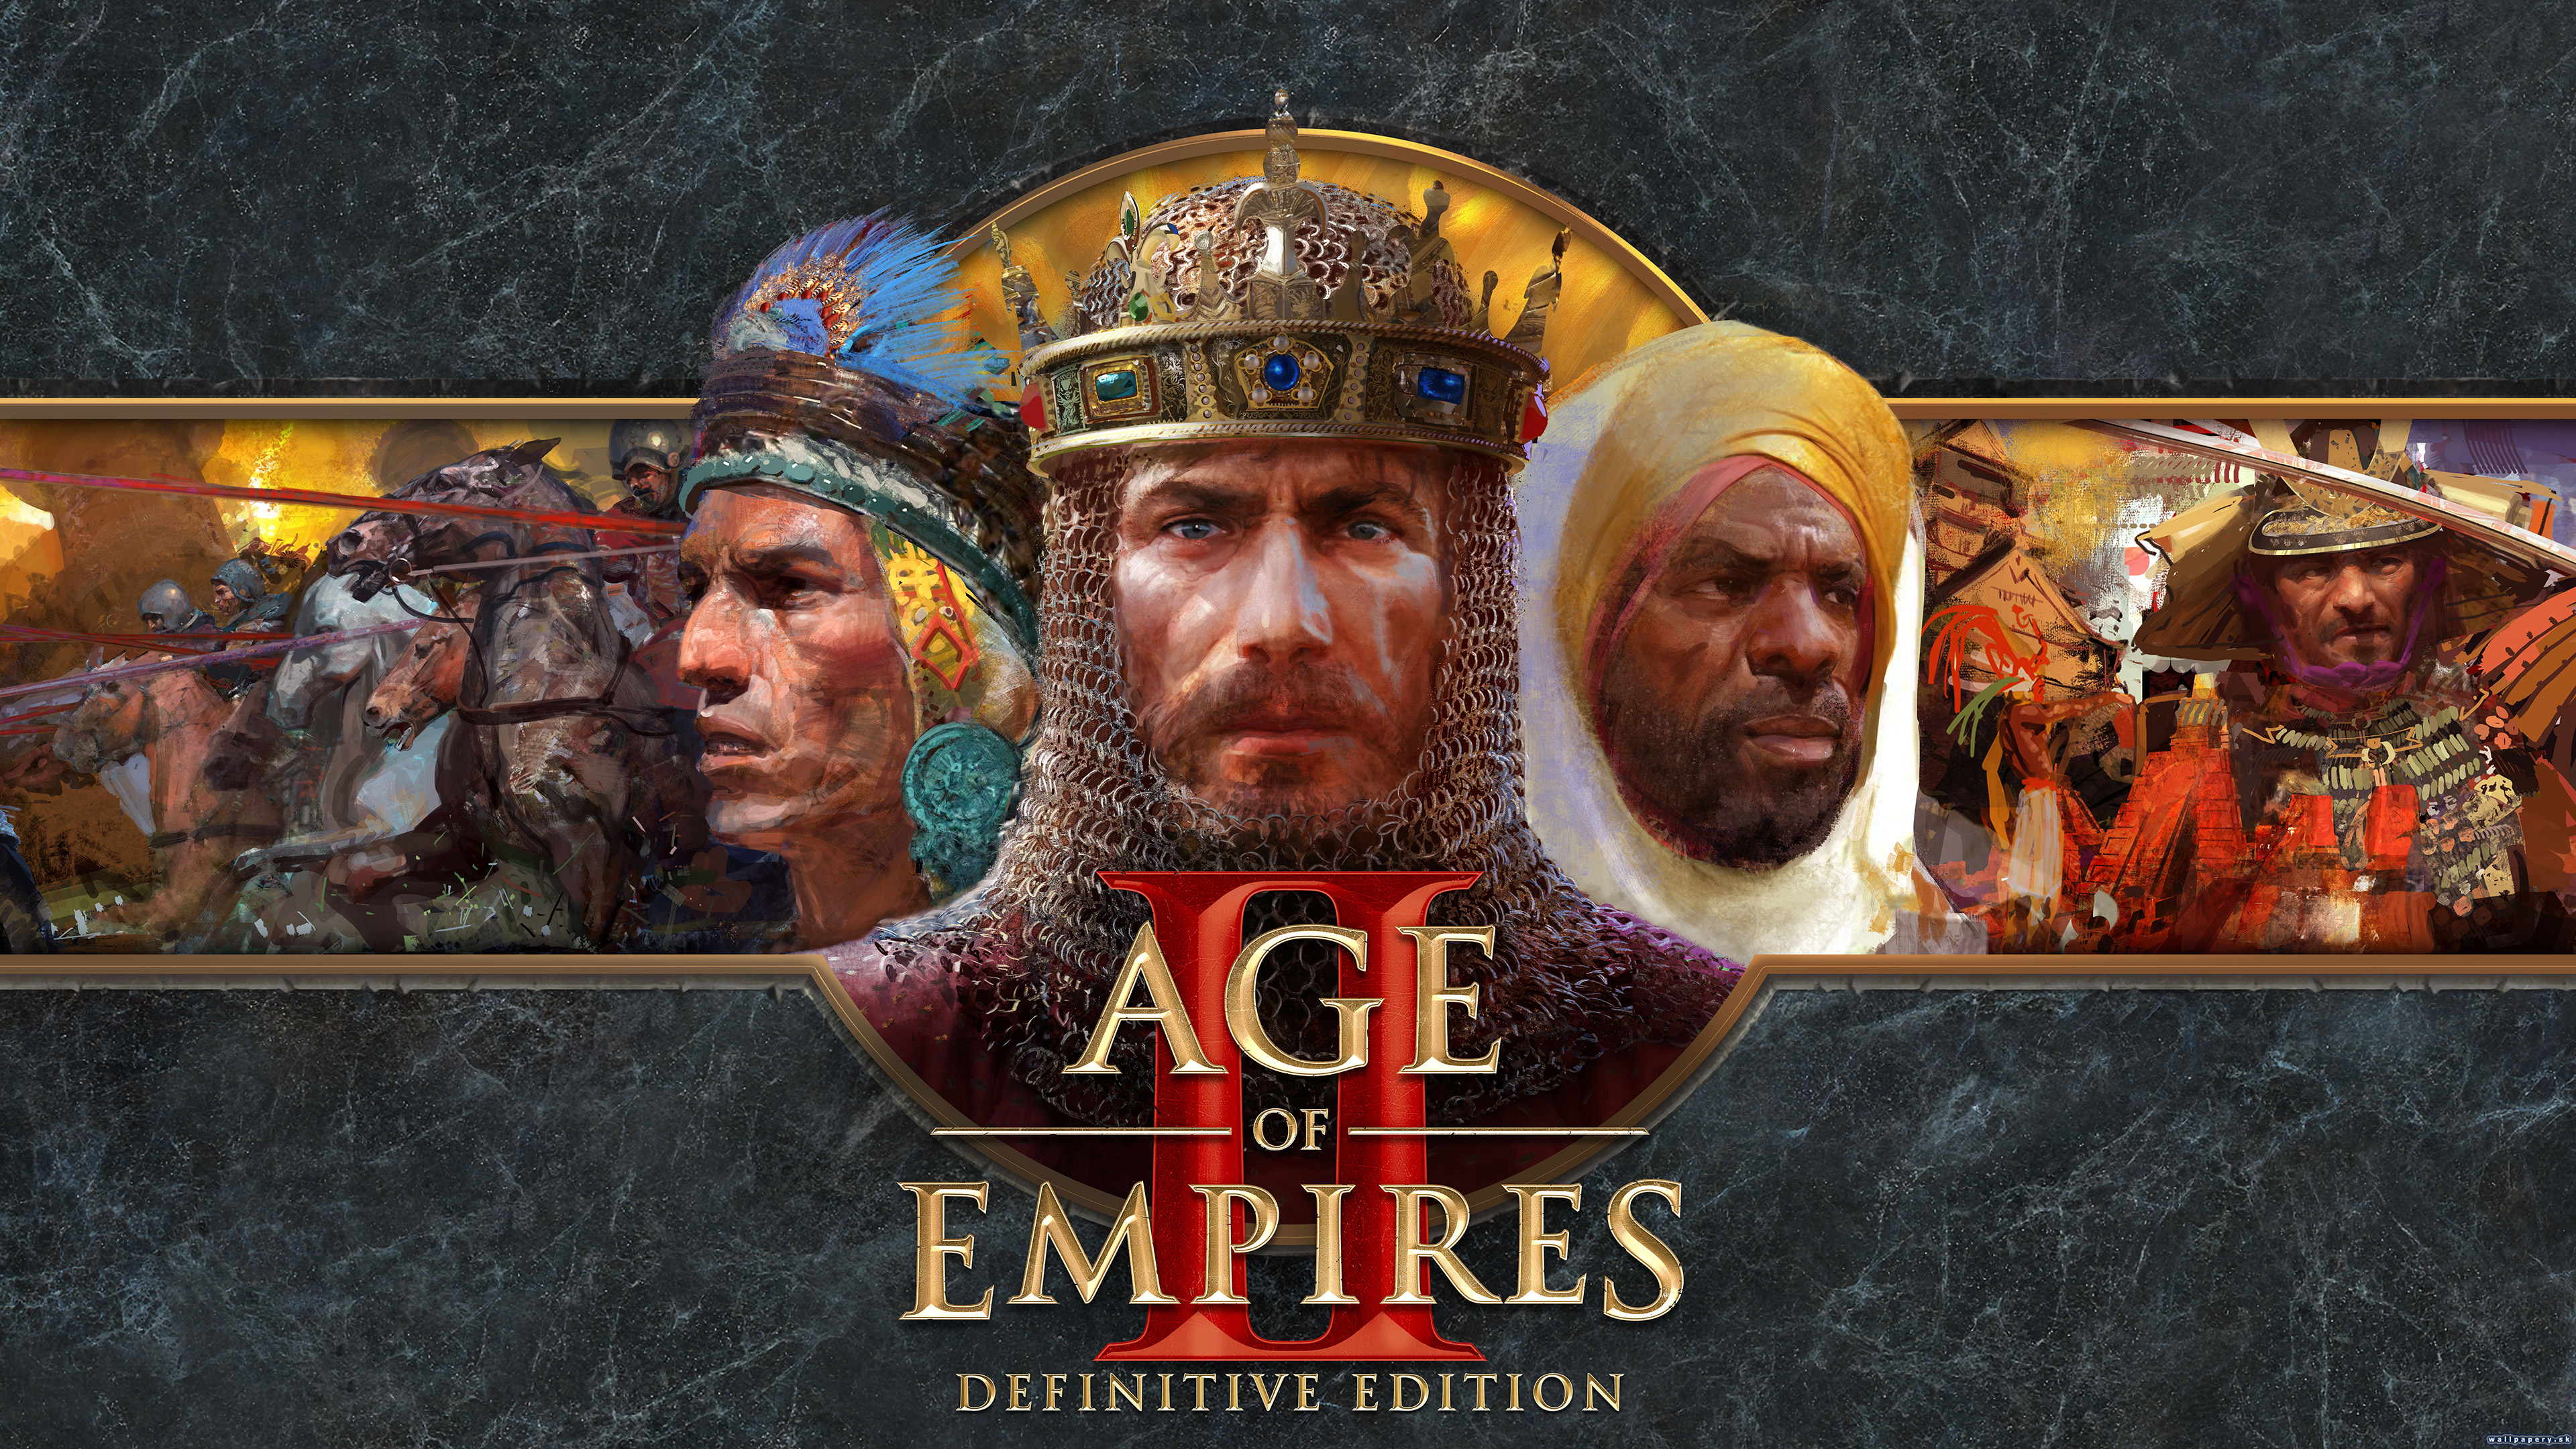 Age of Empires II: Definitive Edition - wallpaper 1